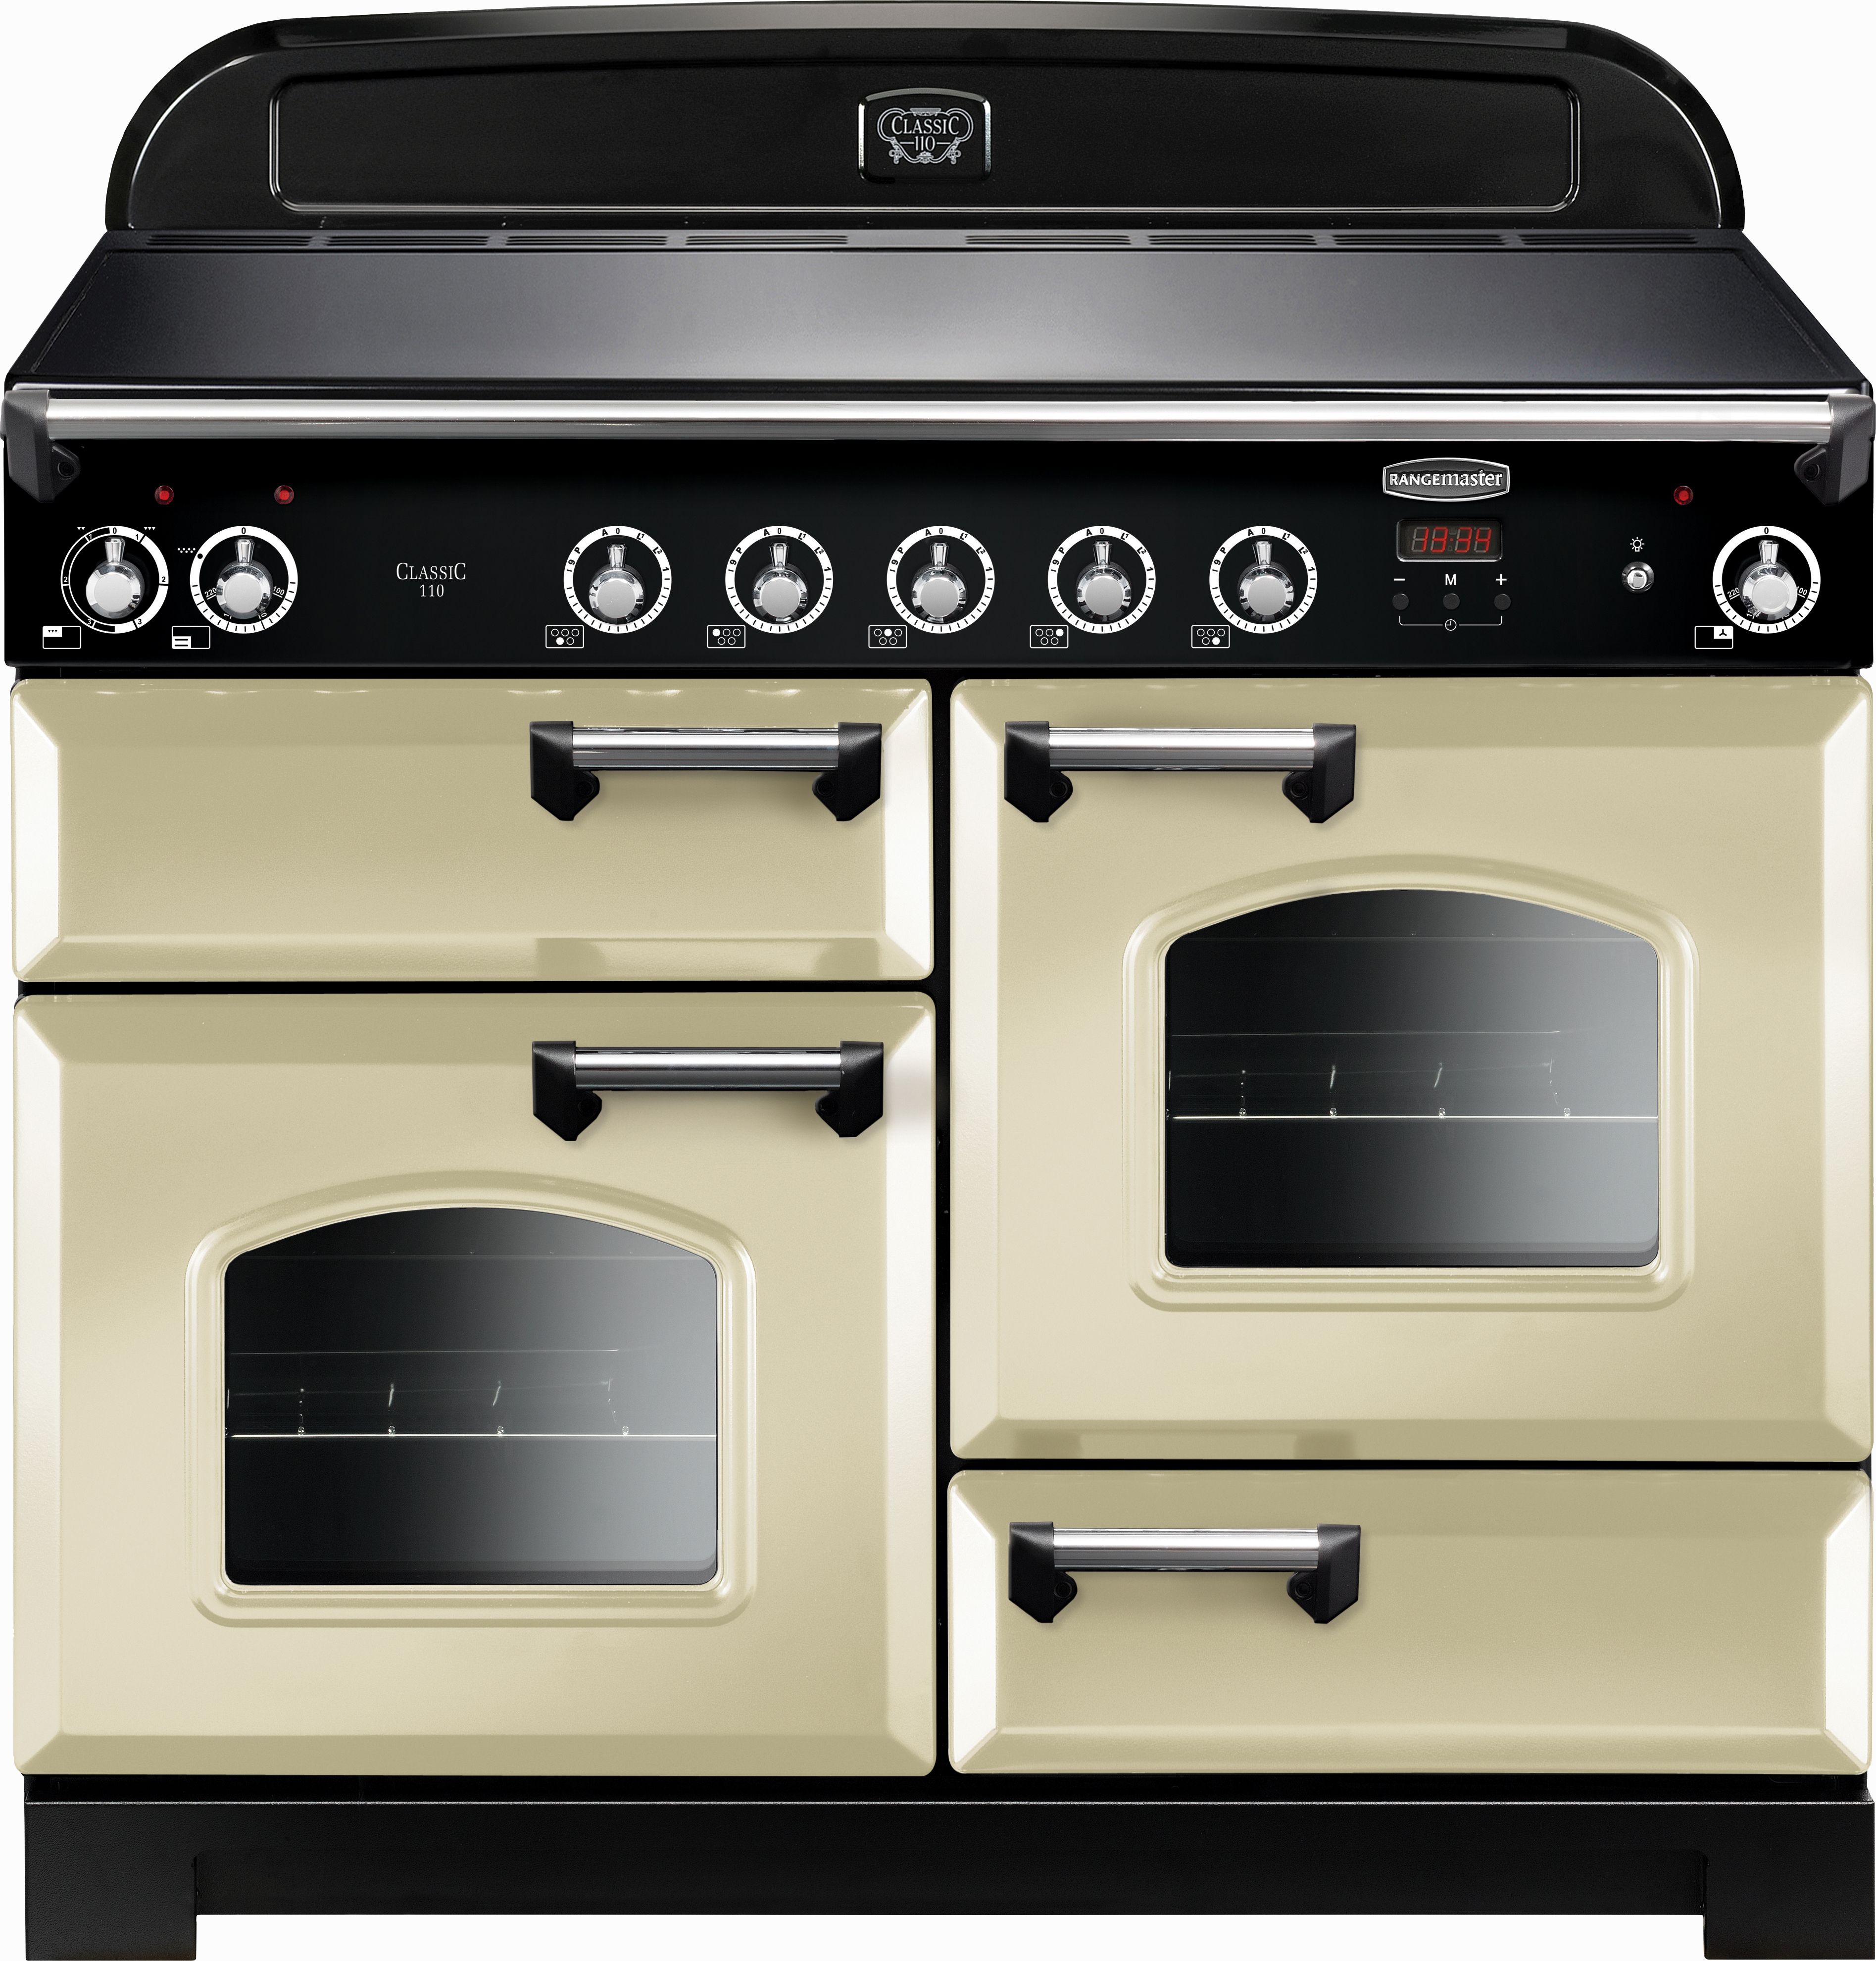 Rangemaster Classic CLA110EICR/C 110cm Electric Range Cooker with Induction Hob - Cream / Chrome - A/A Rated, Cream